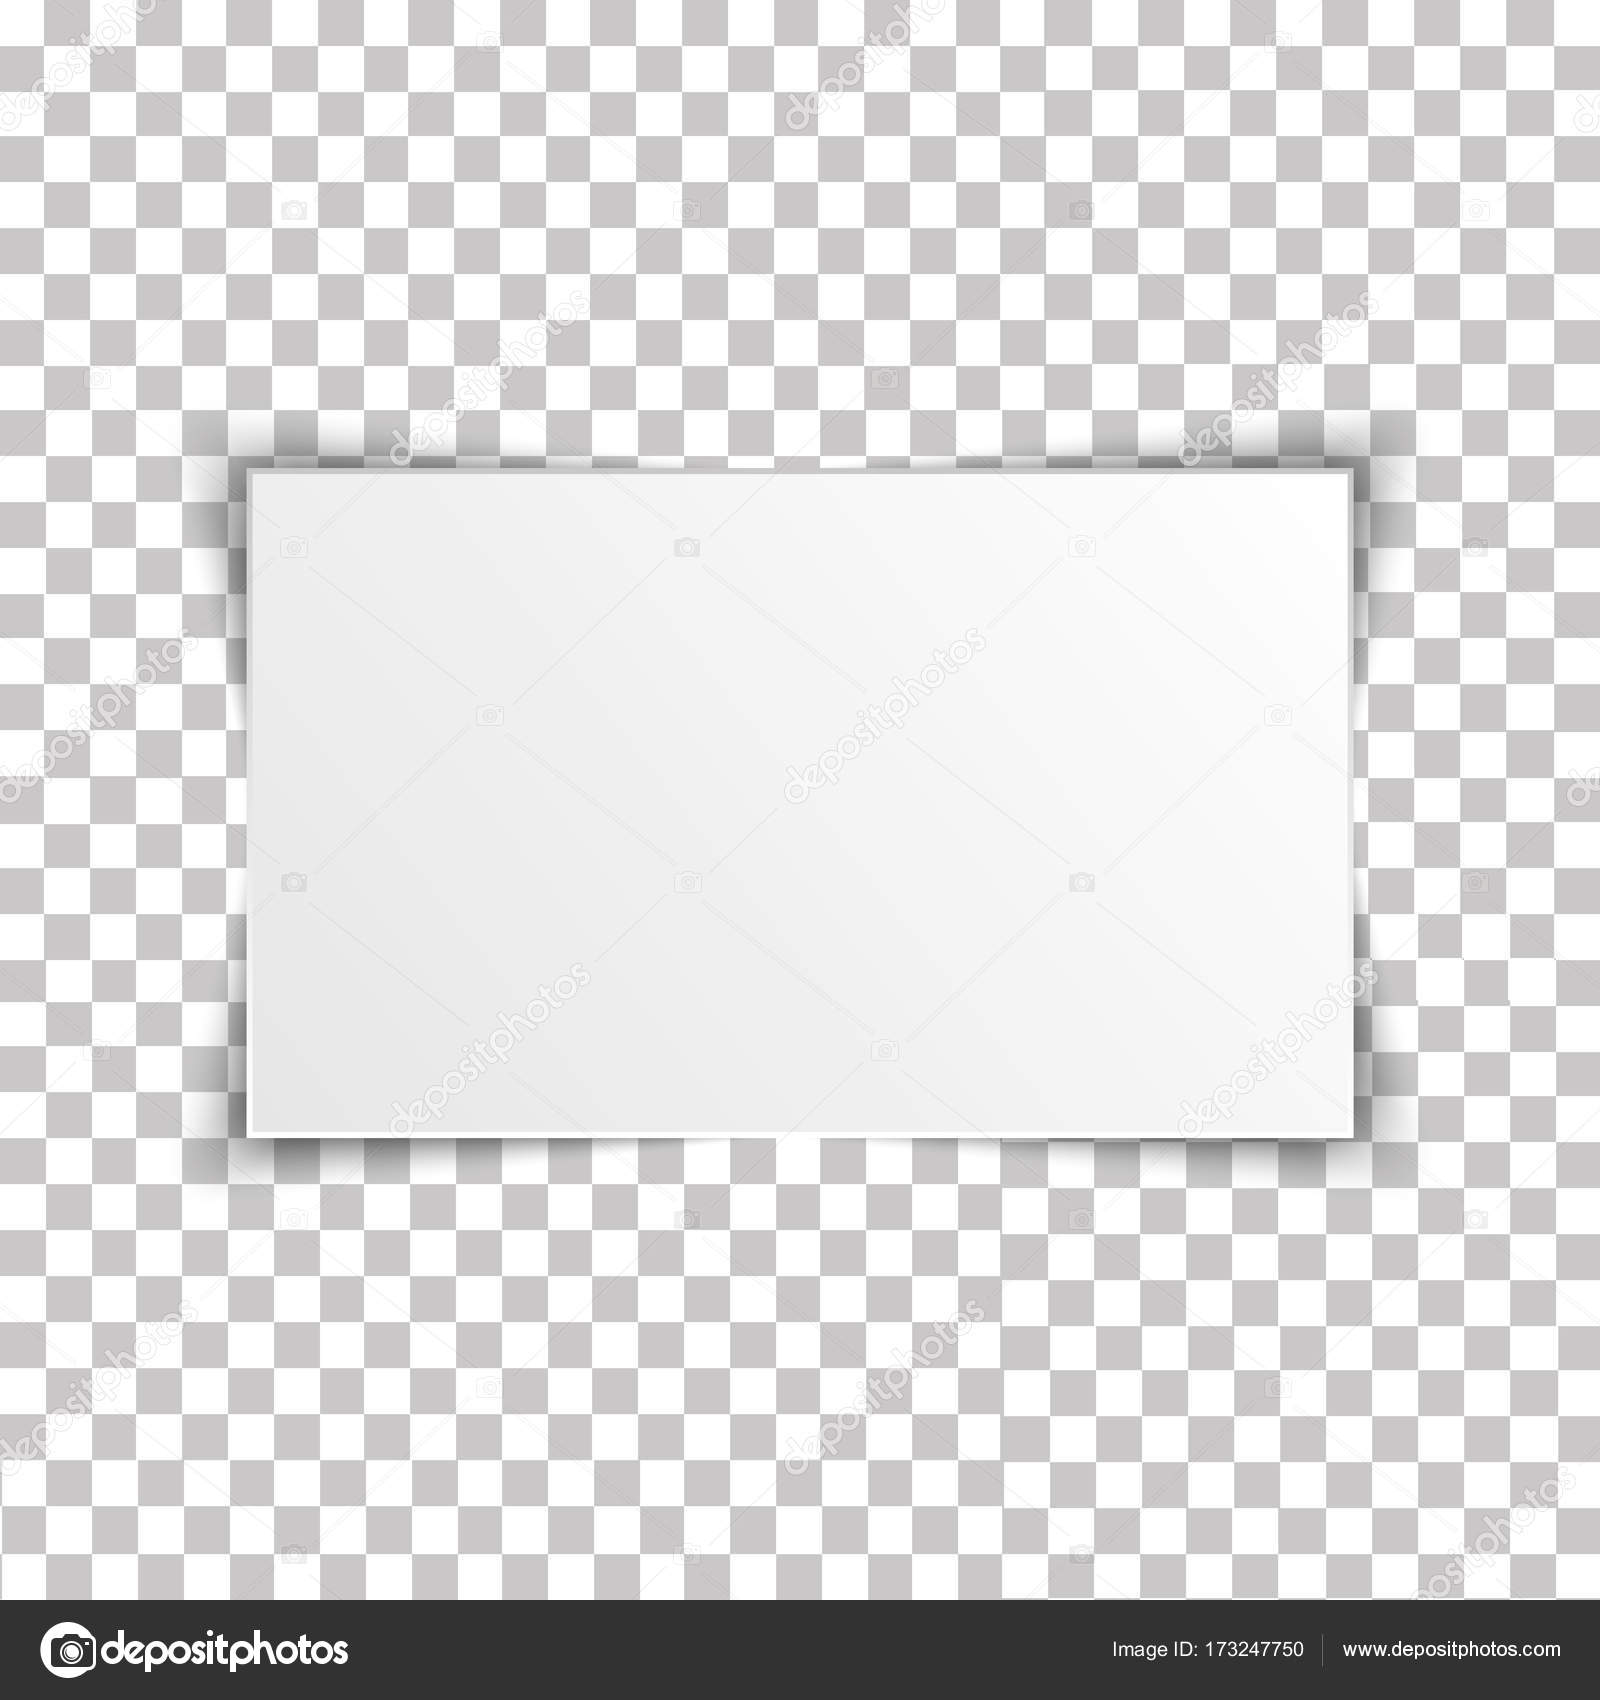 Blank Rectangle Album Template On Transparent Background Vector